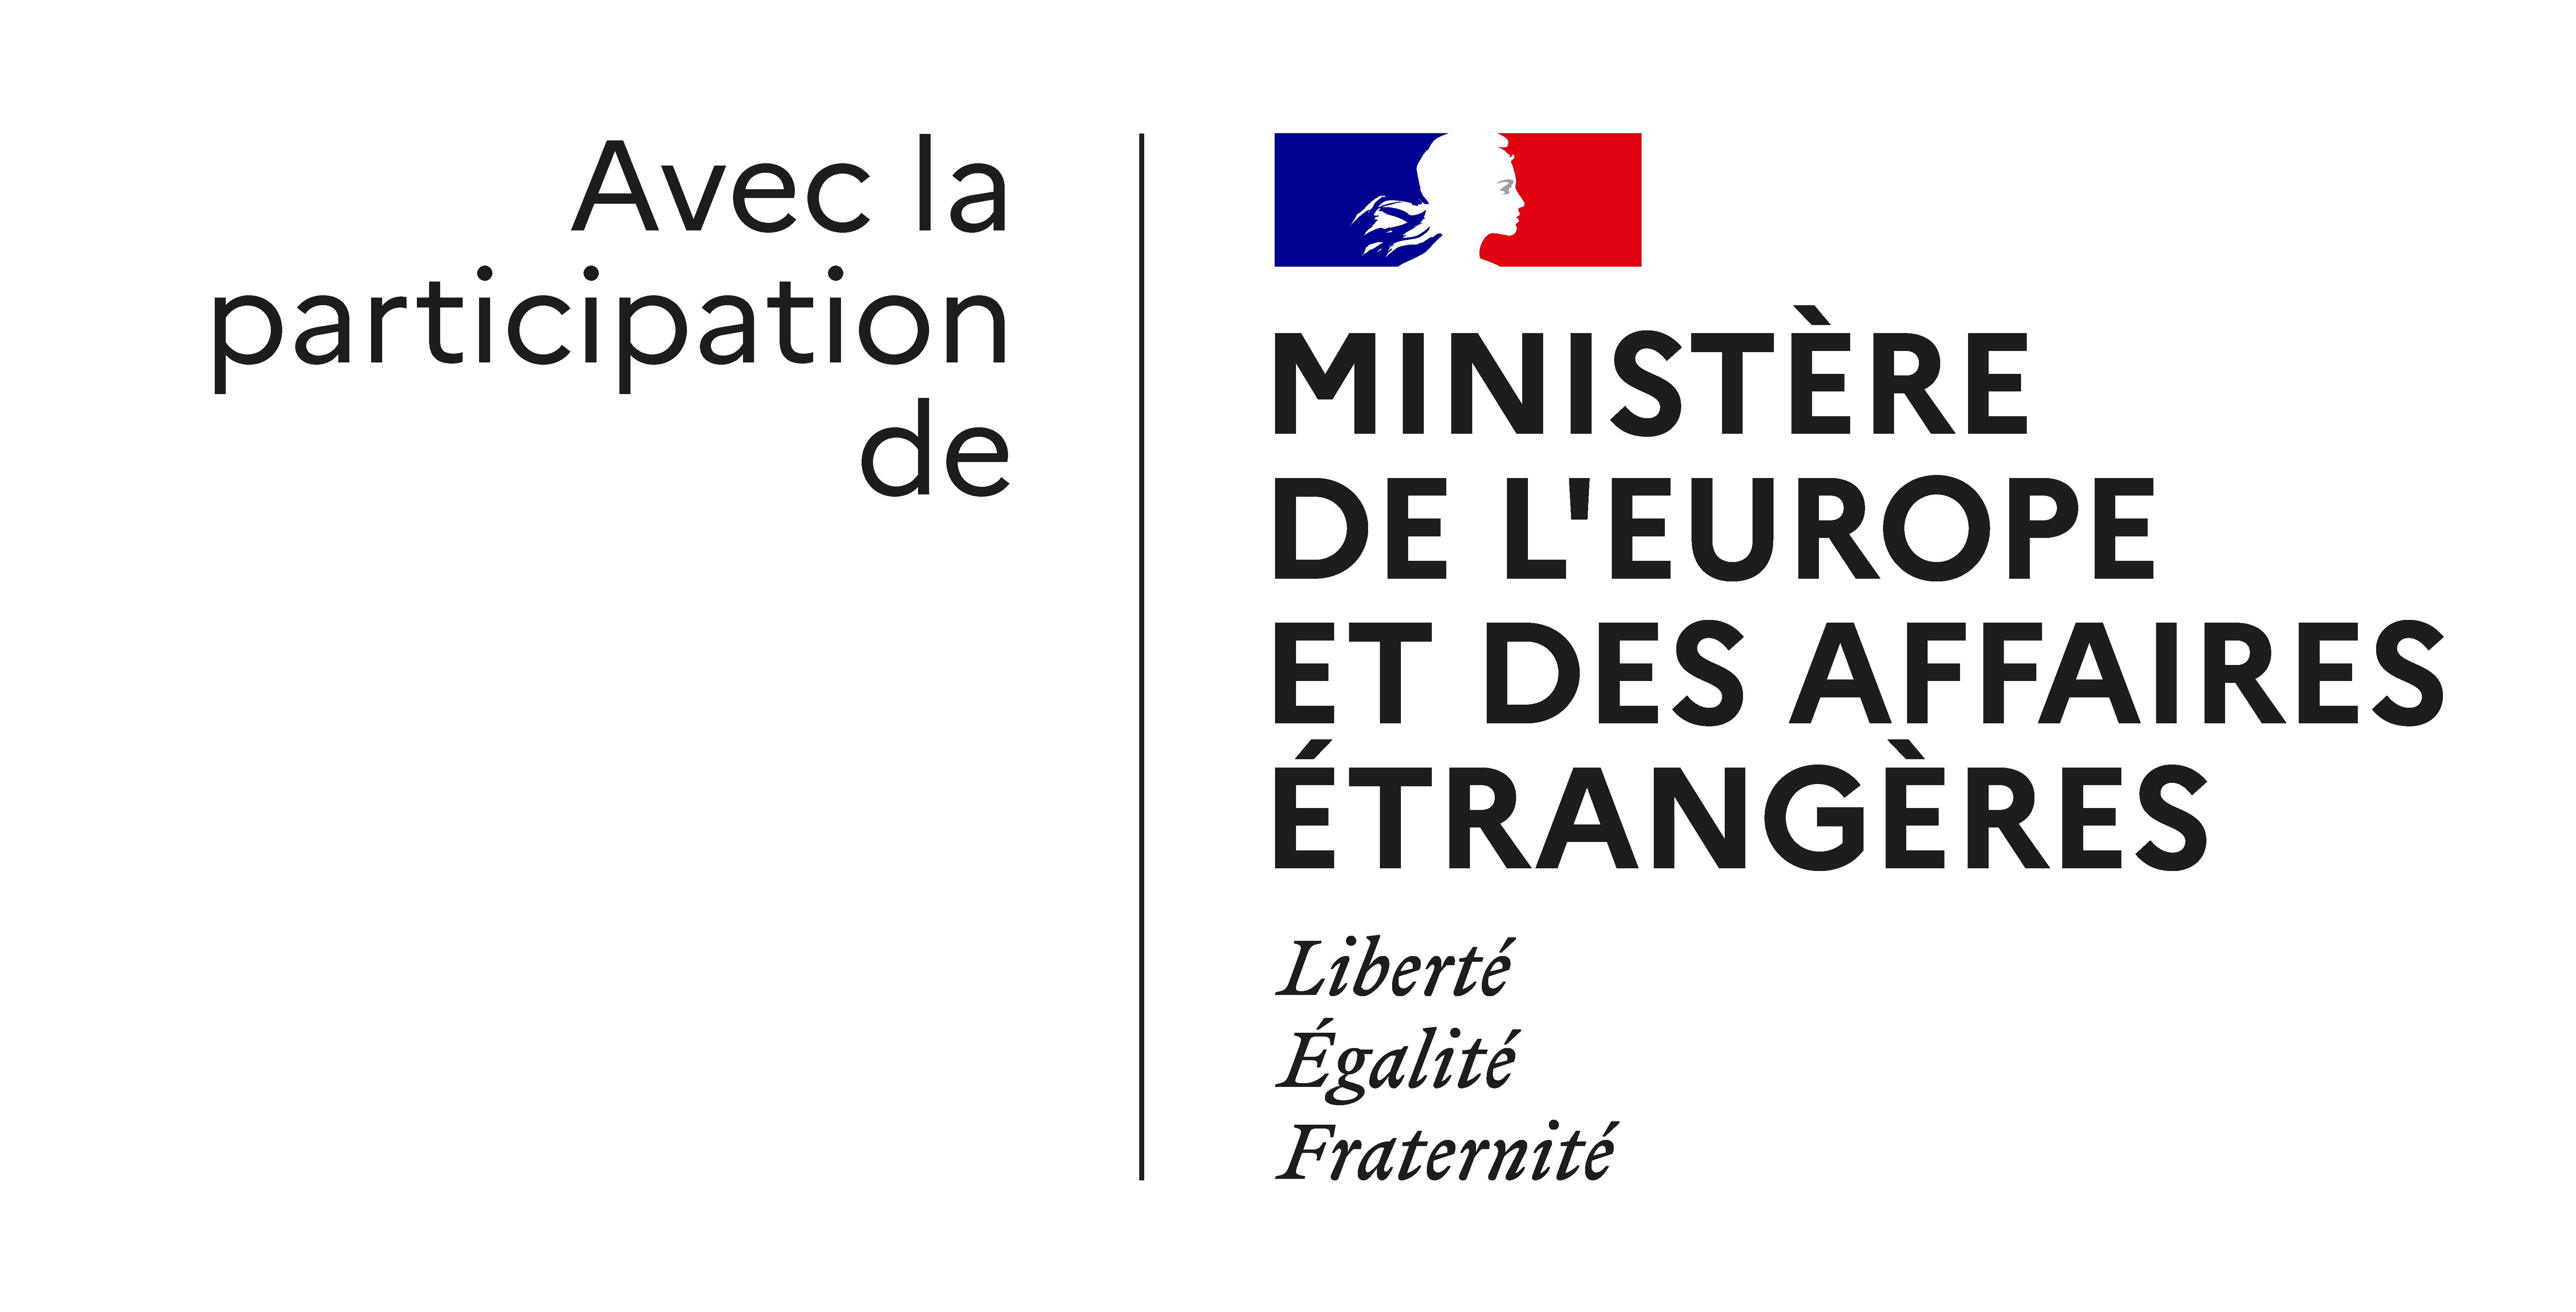 The Crisis and Support Center of the Ministry for Europe and Foreign Affairs of France